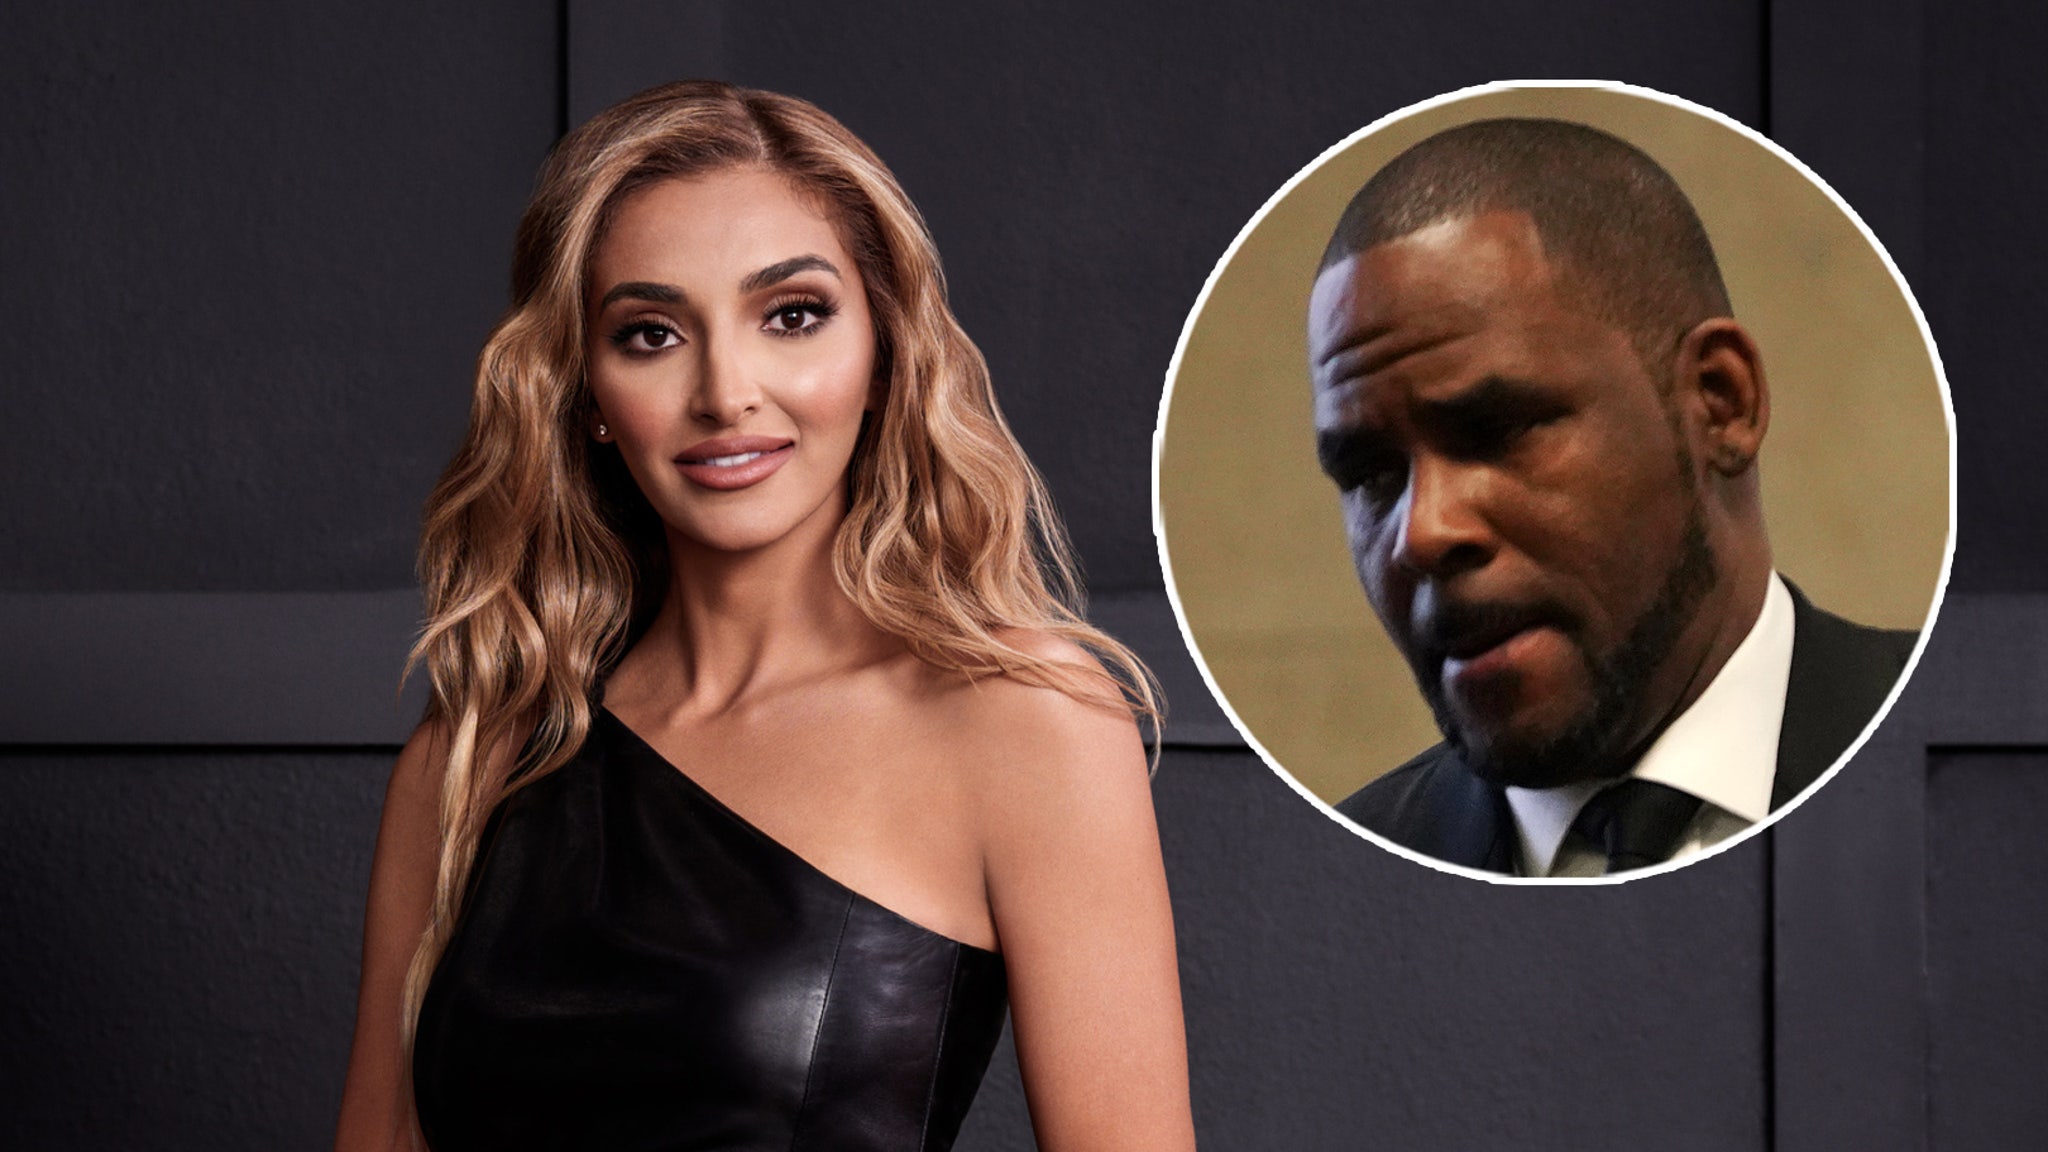 Shahs of Sunset Star Sara Jeihooni Reveals She Dated R Kelly for 3 Years